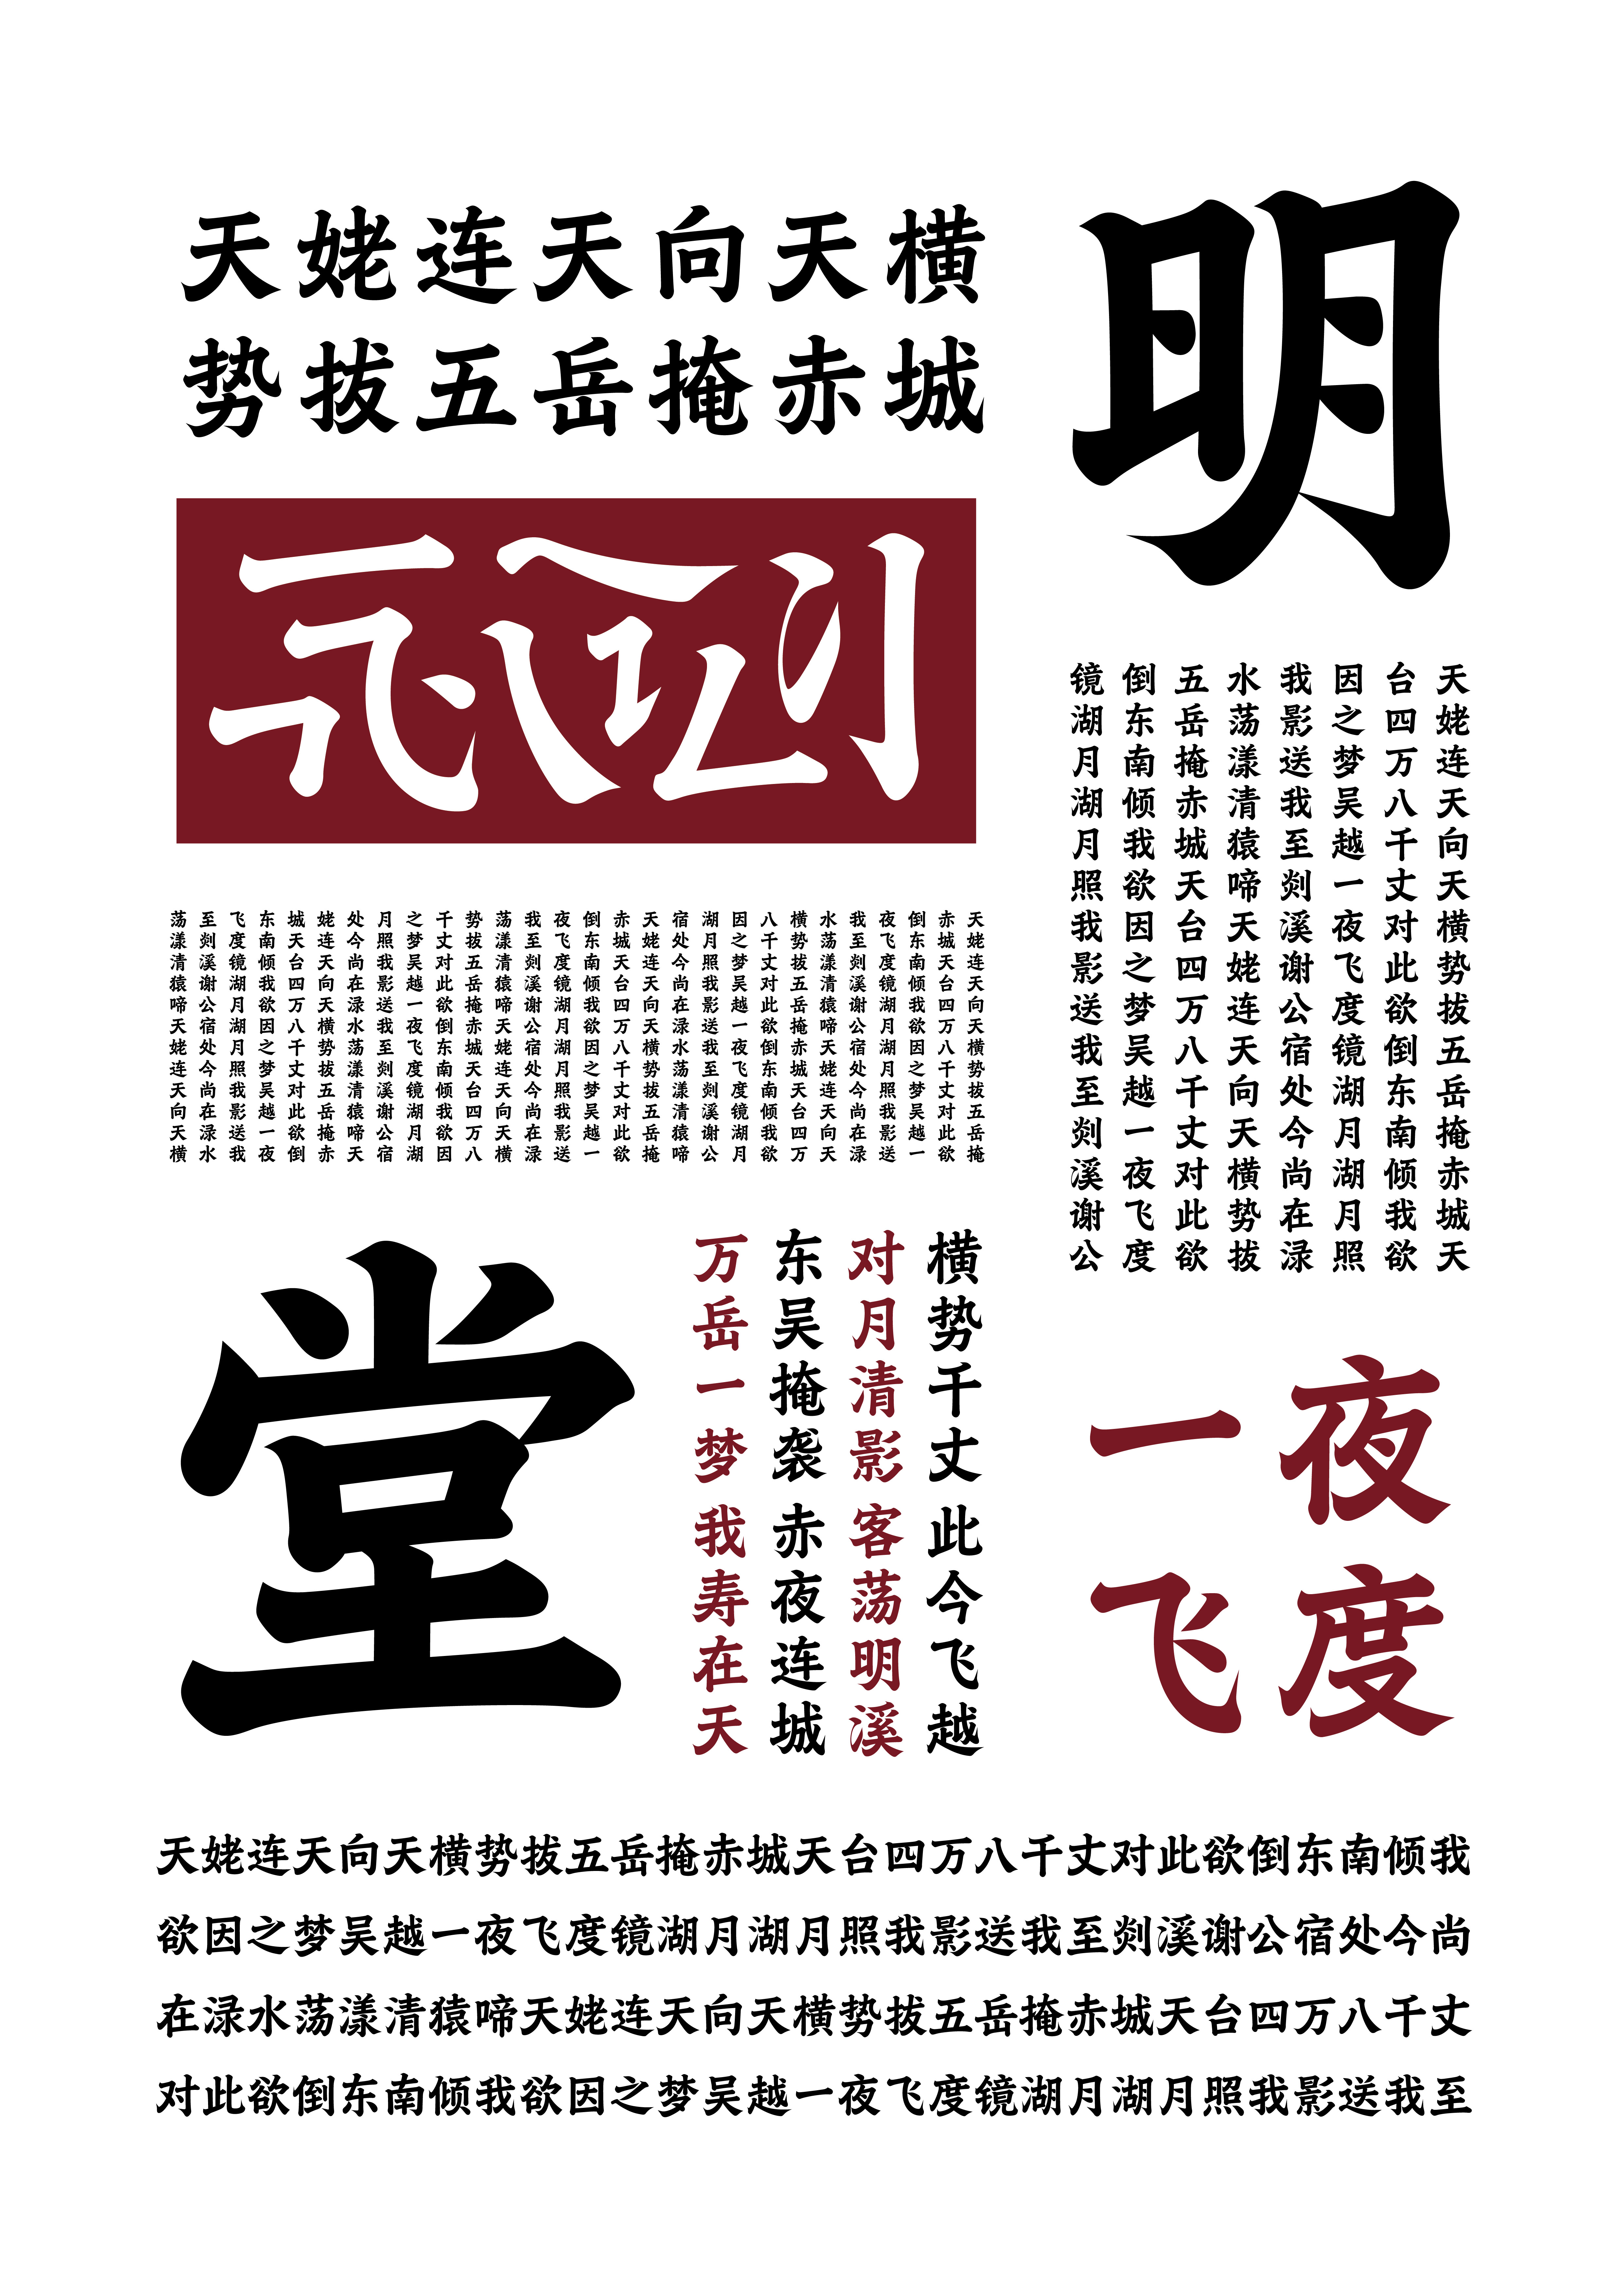 Incorporate ancient and modern Chinese regular script design